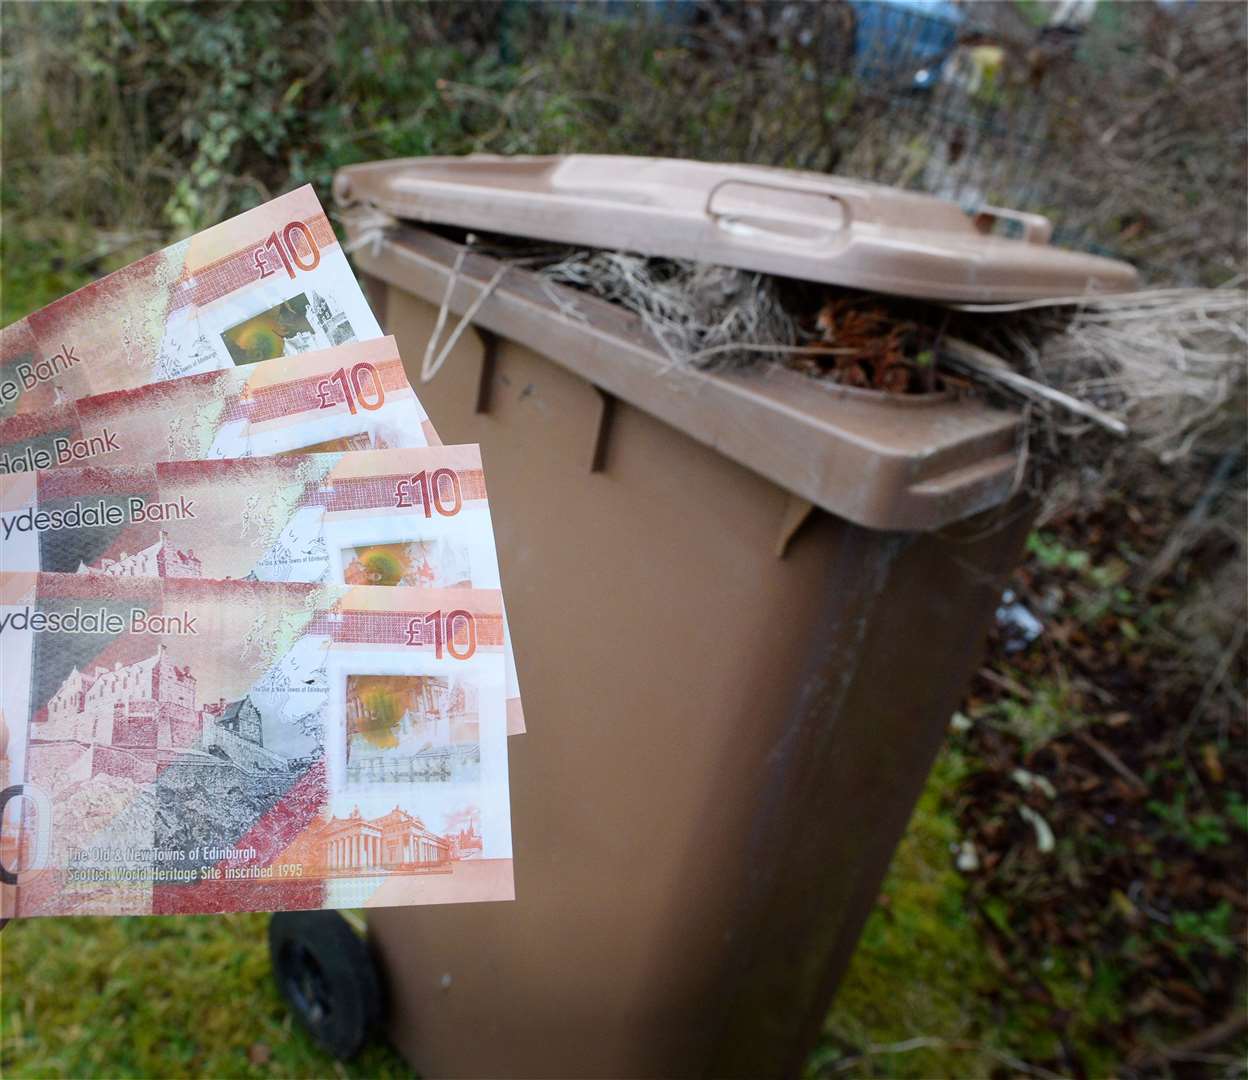 The council appears to making less money than before on brown bins.